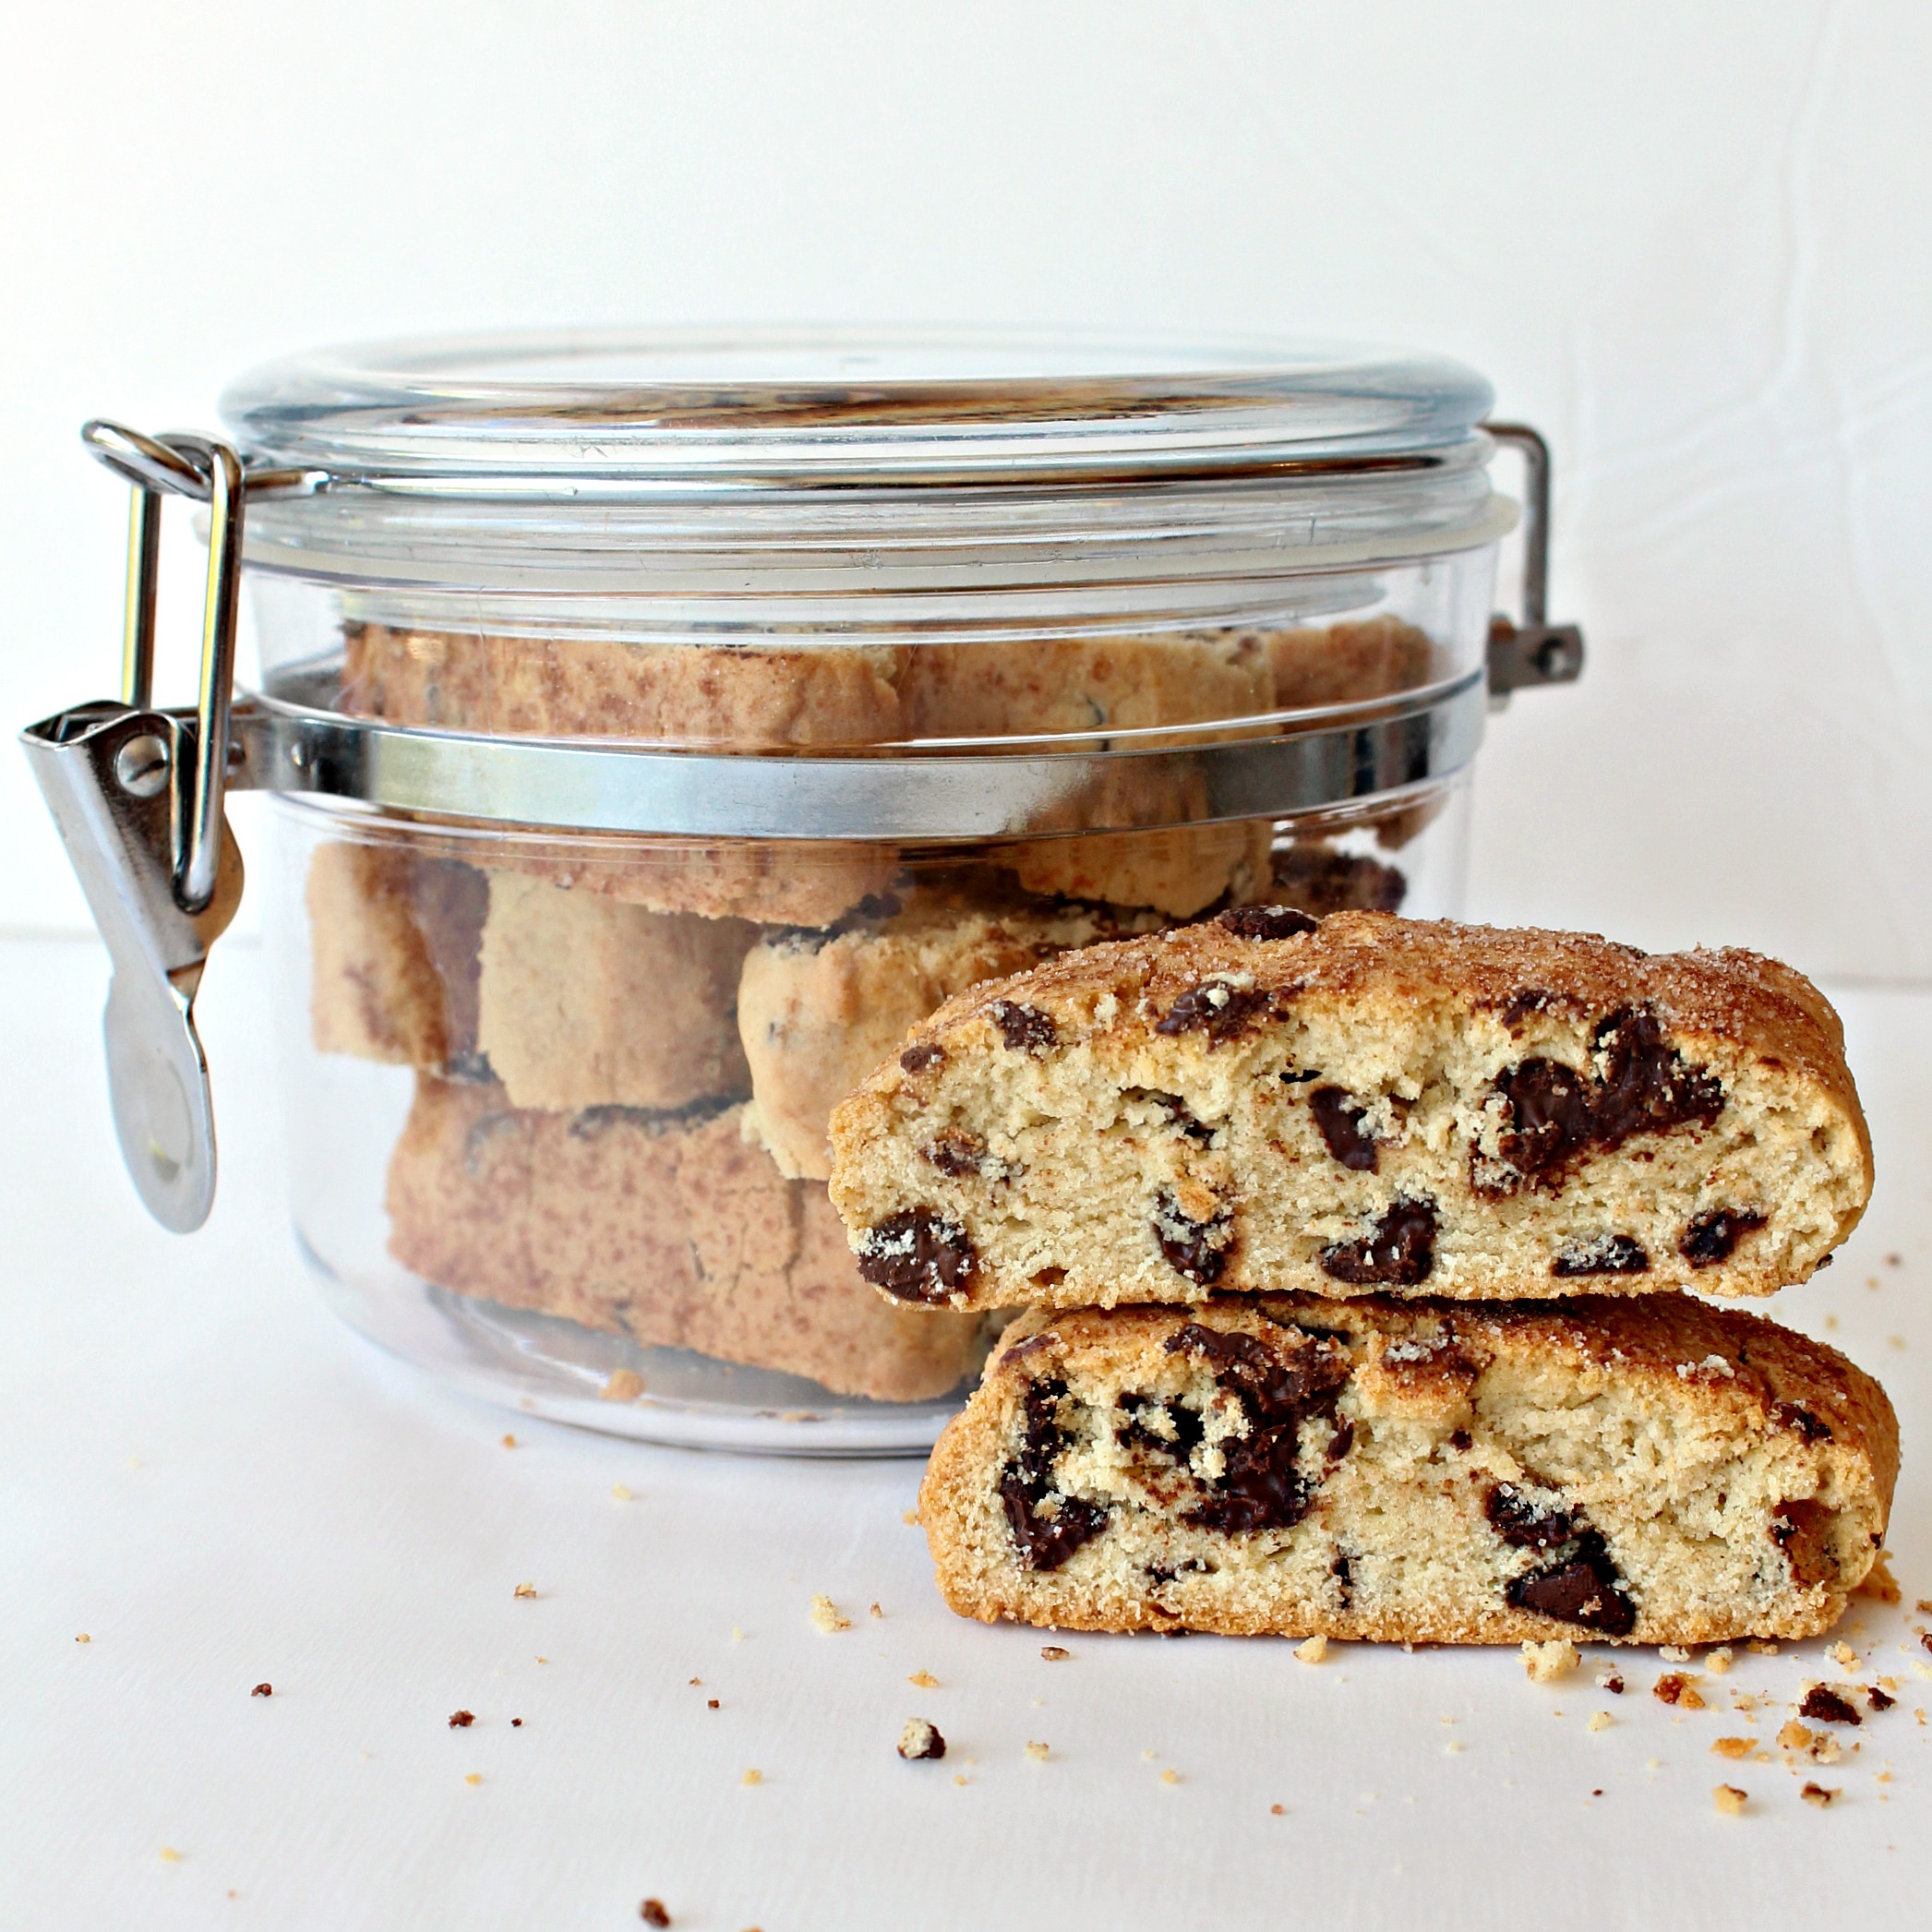 The World's Best Passover Chocolate Chip Mandel Bread - The Monday Box